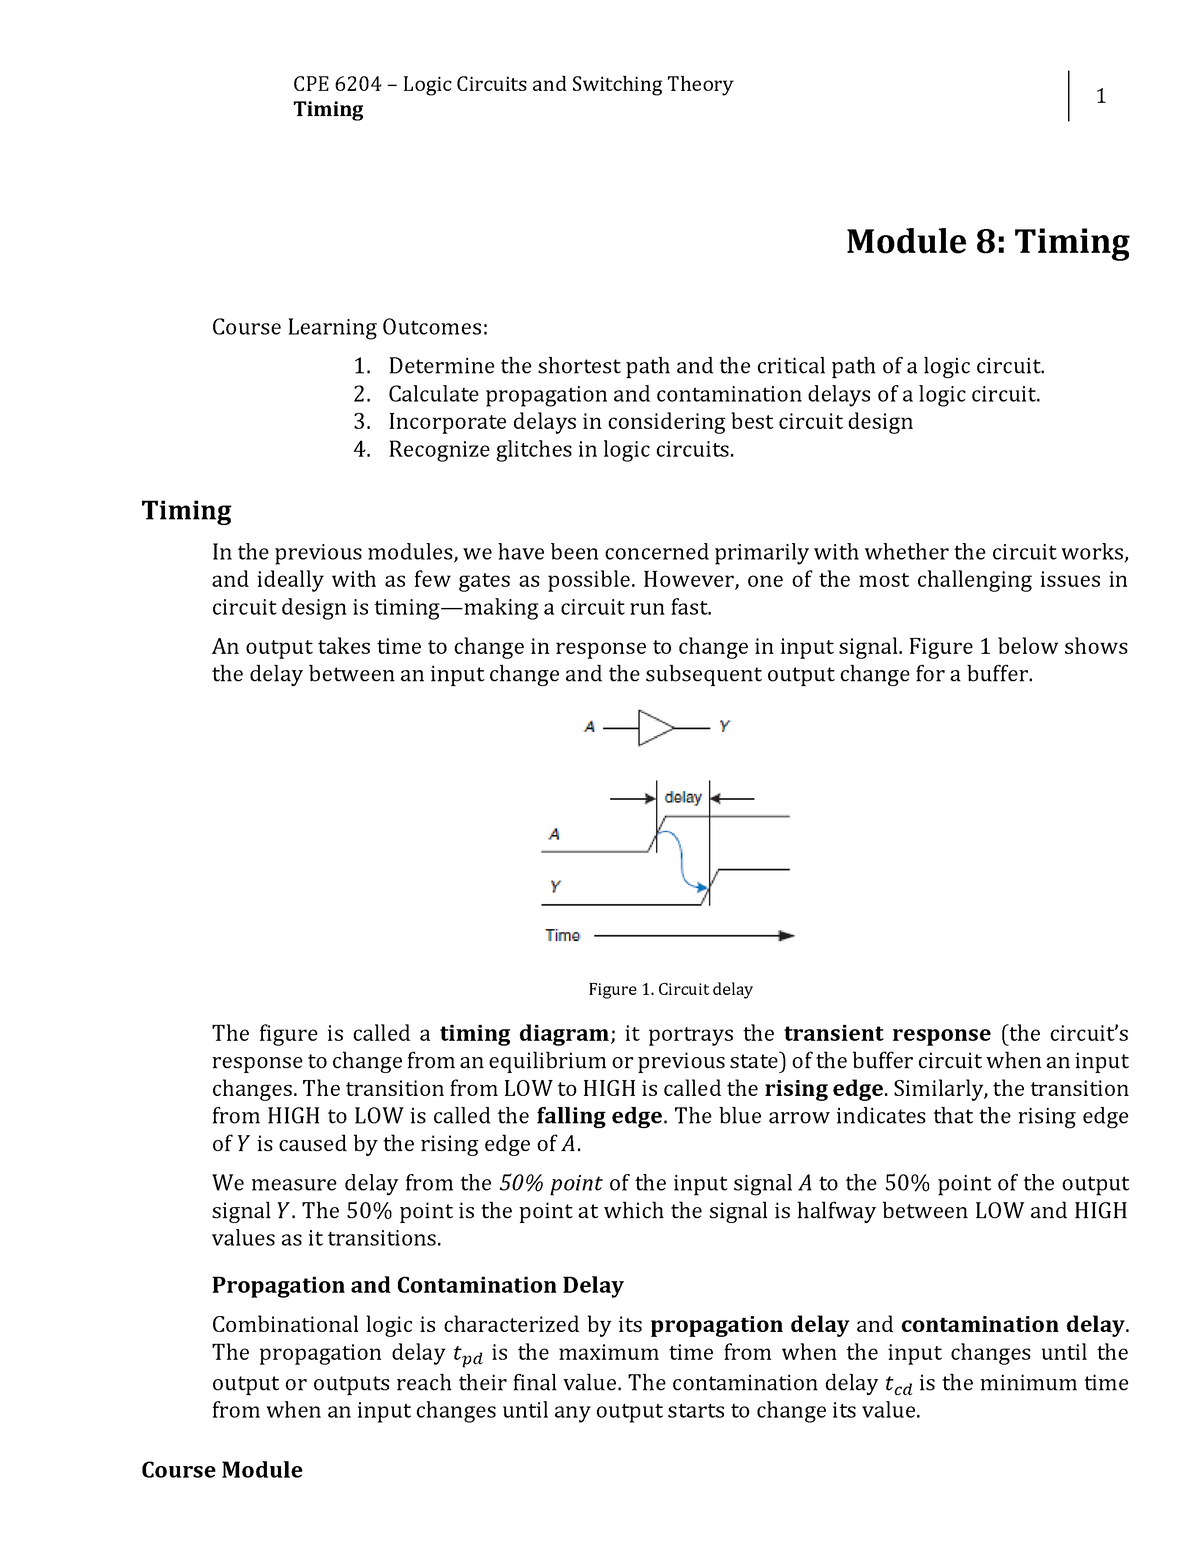 Week 9 - Module 8 Timing - HDL, or Hardware Description Language, is a ...